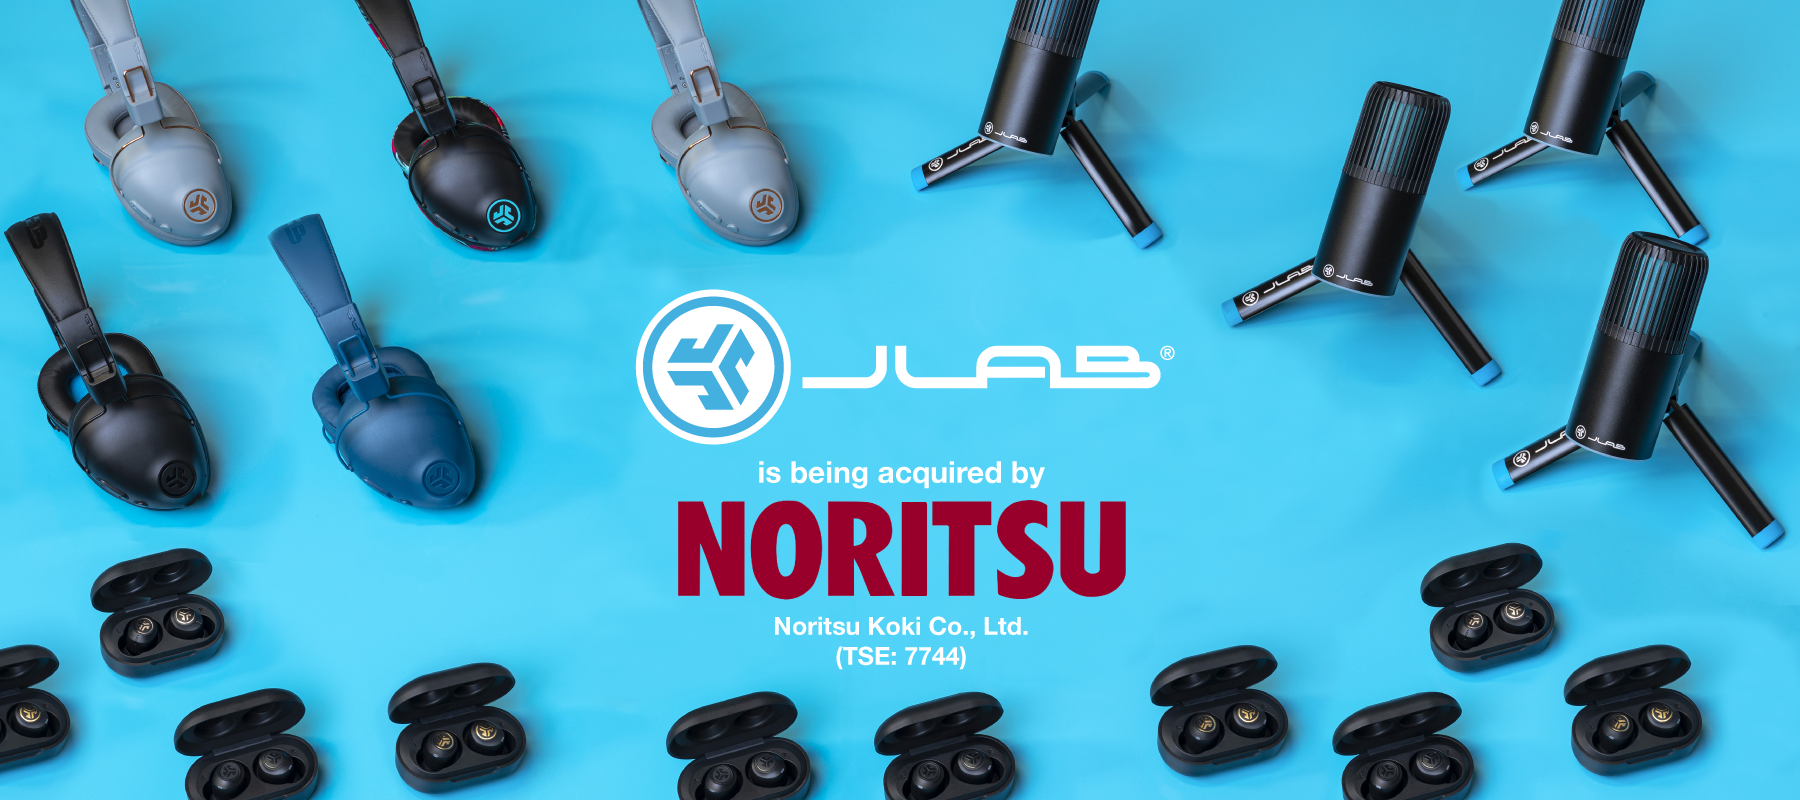 JLab Brings On New Equity Partner With Noritsu Koki; Purchased for $370M